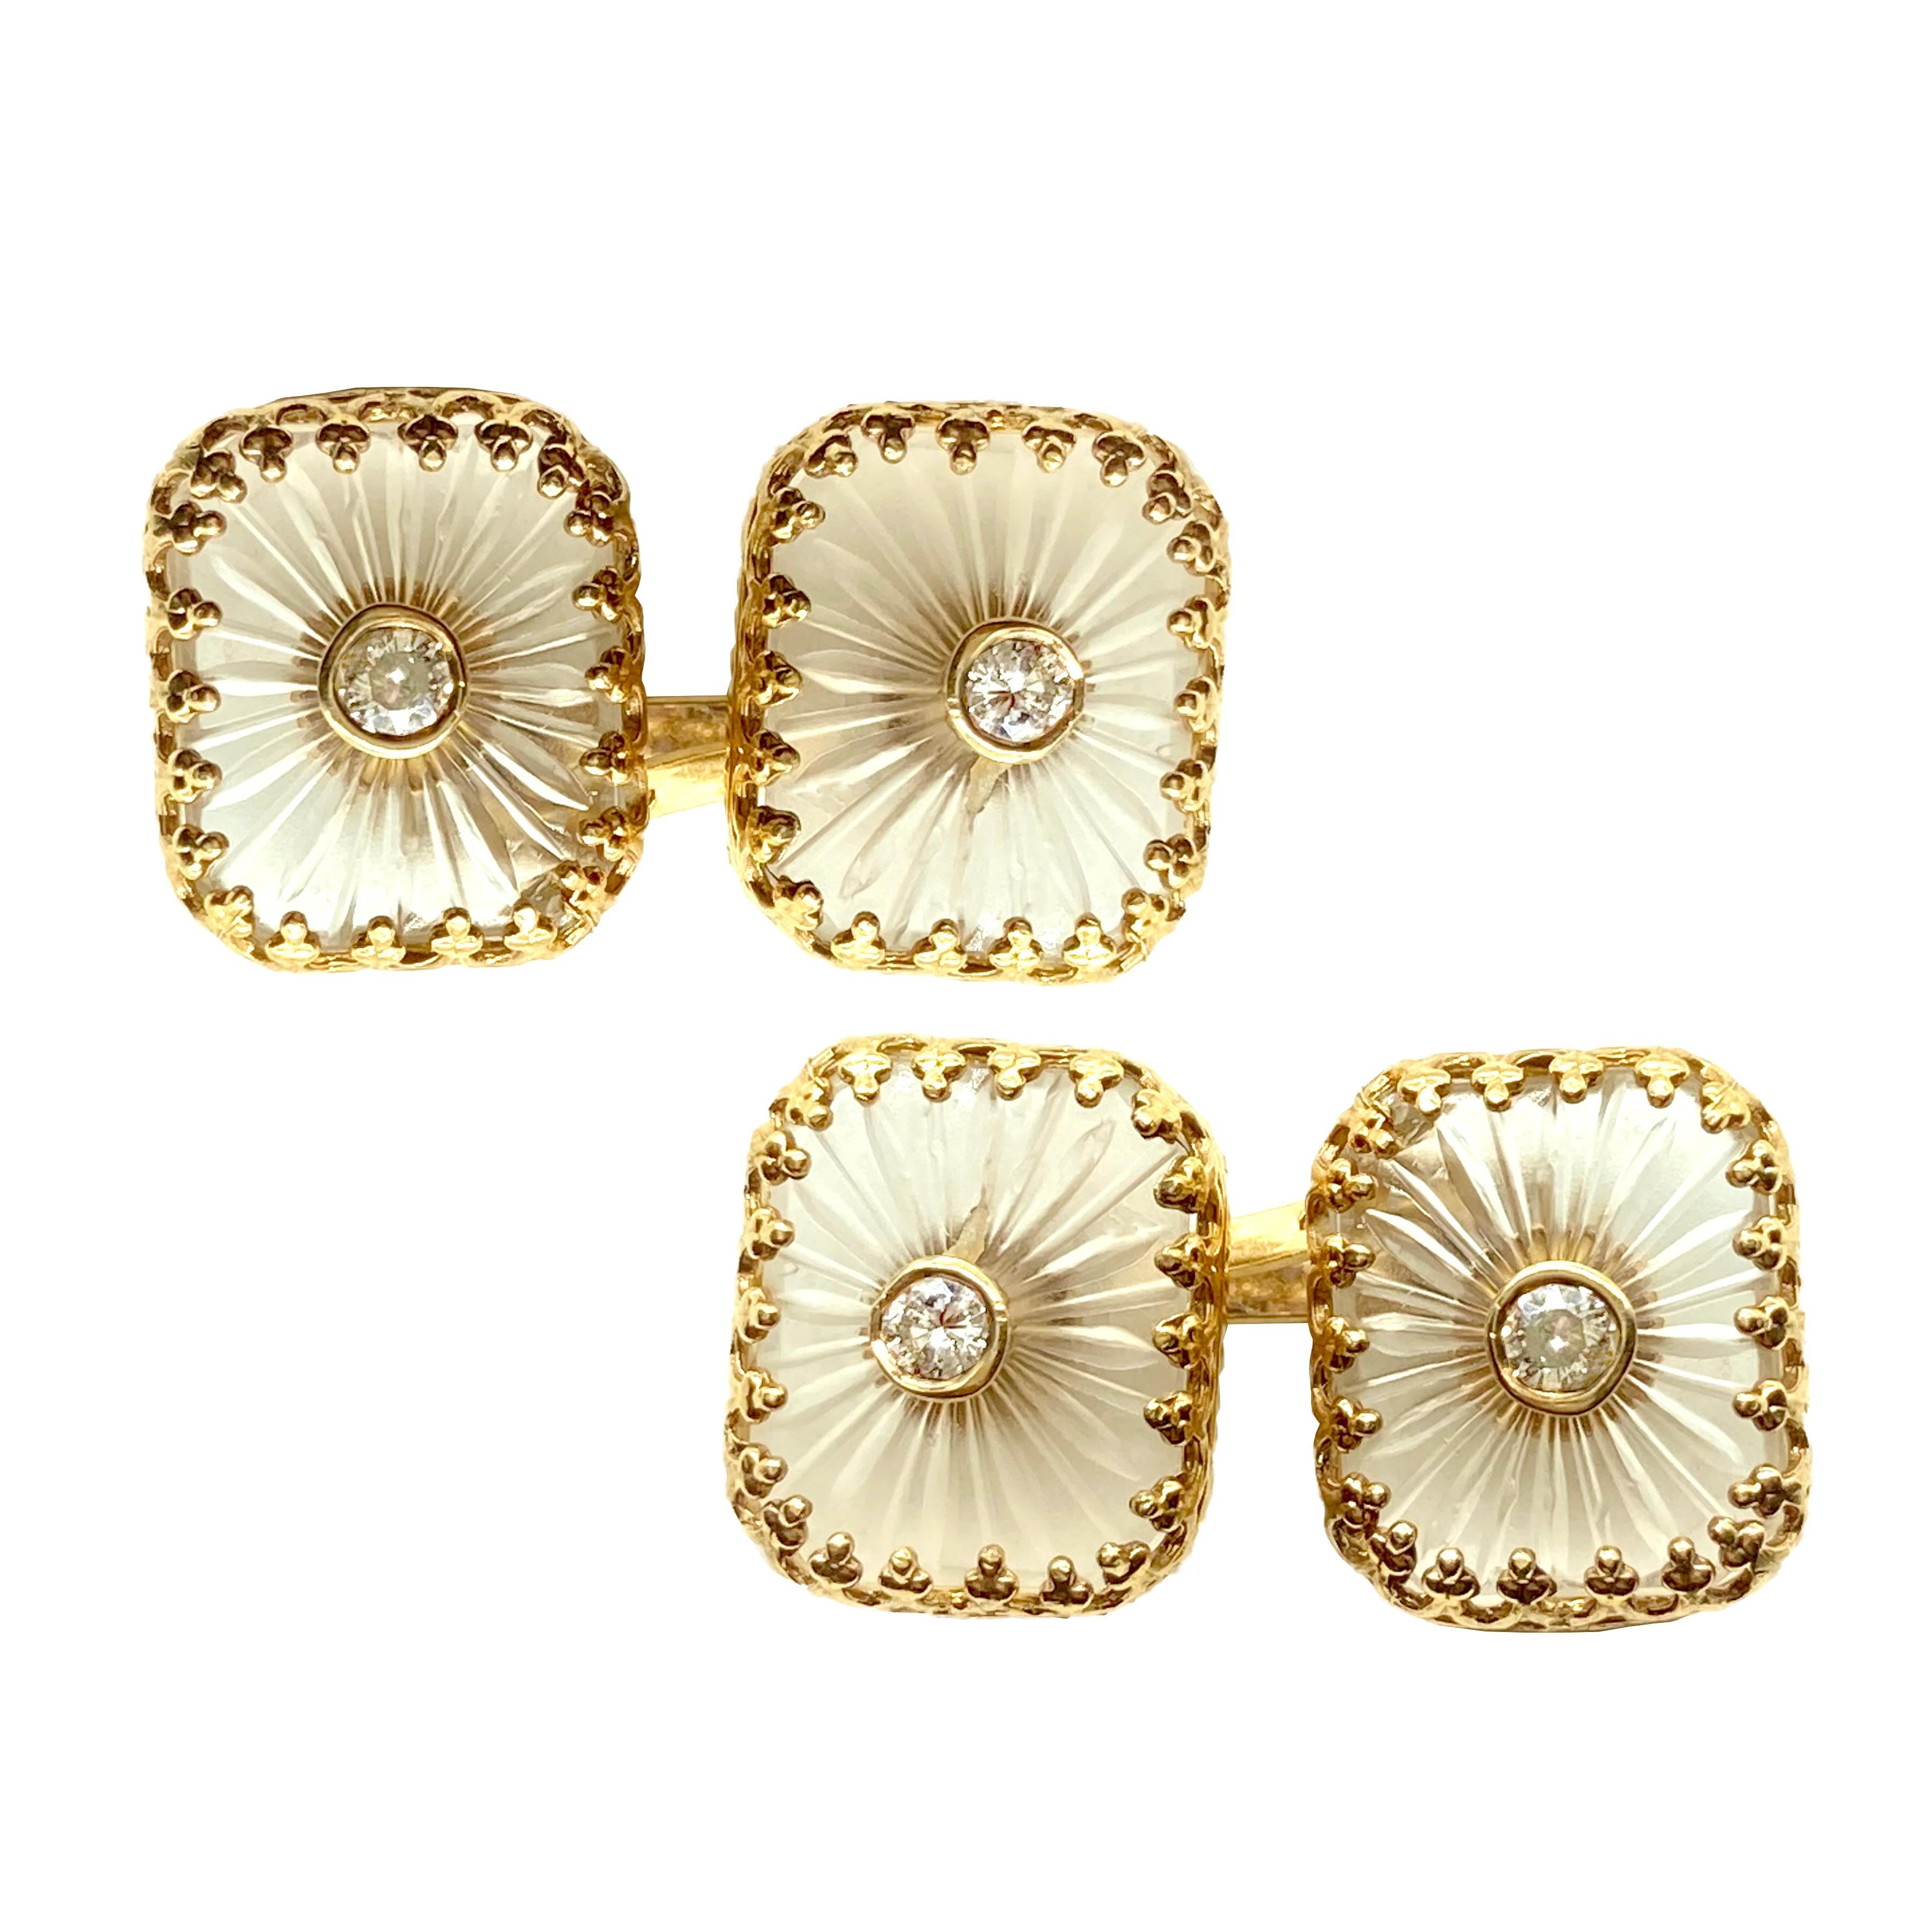 A beautiful pair of fluted rock crystal and diamond cufflinks in 14 karat yellow gold. Circa 1950s.